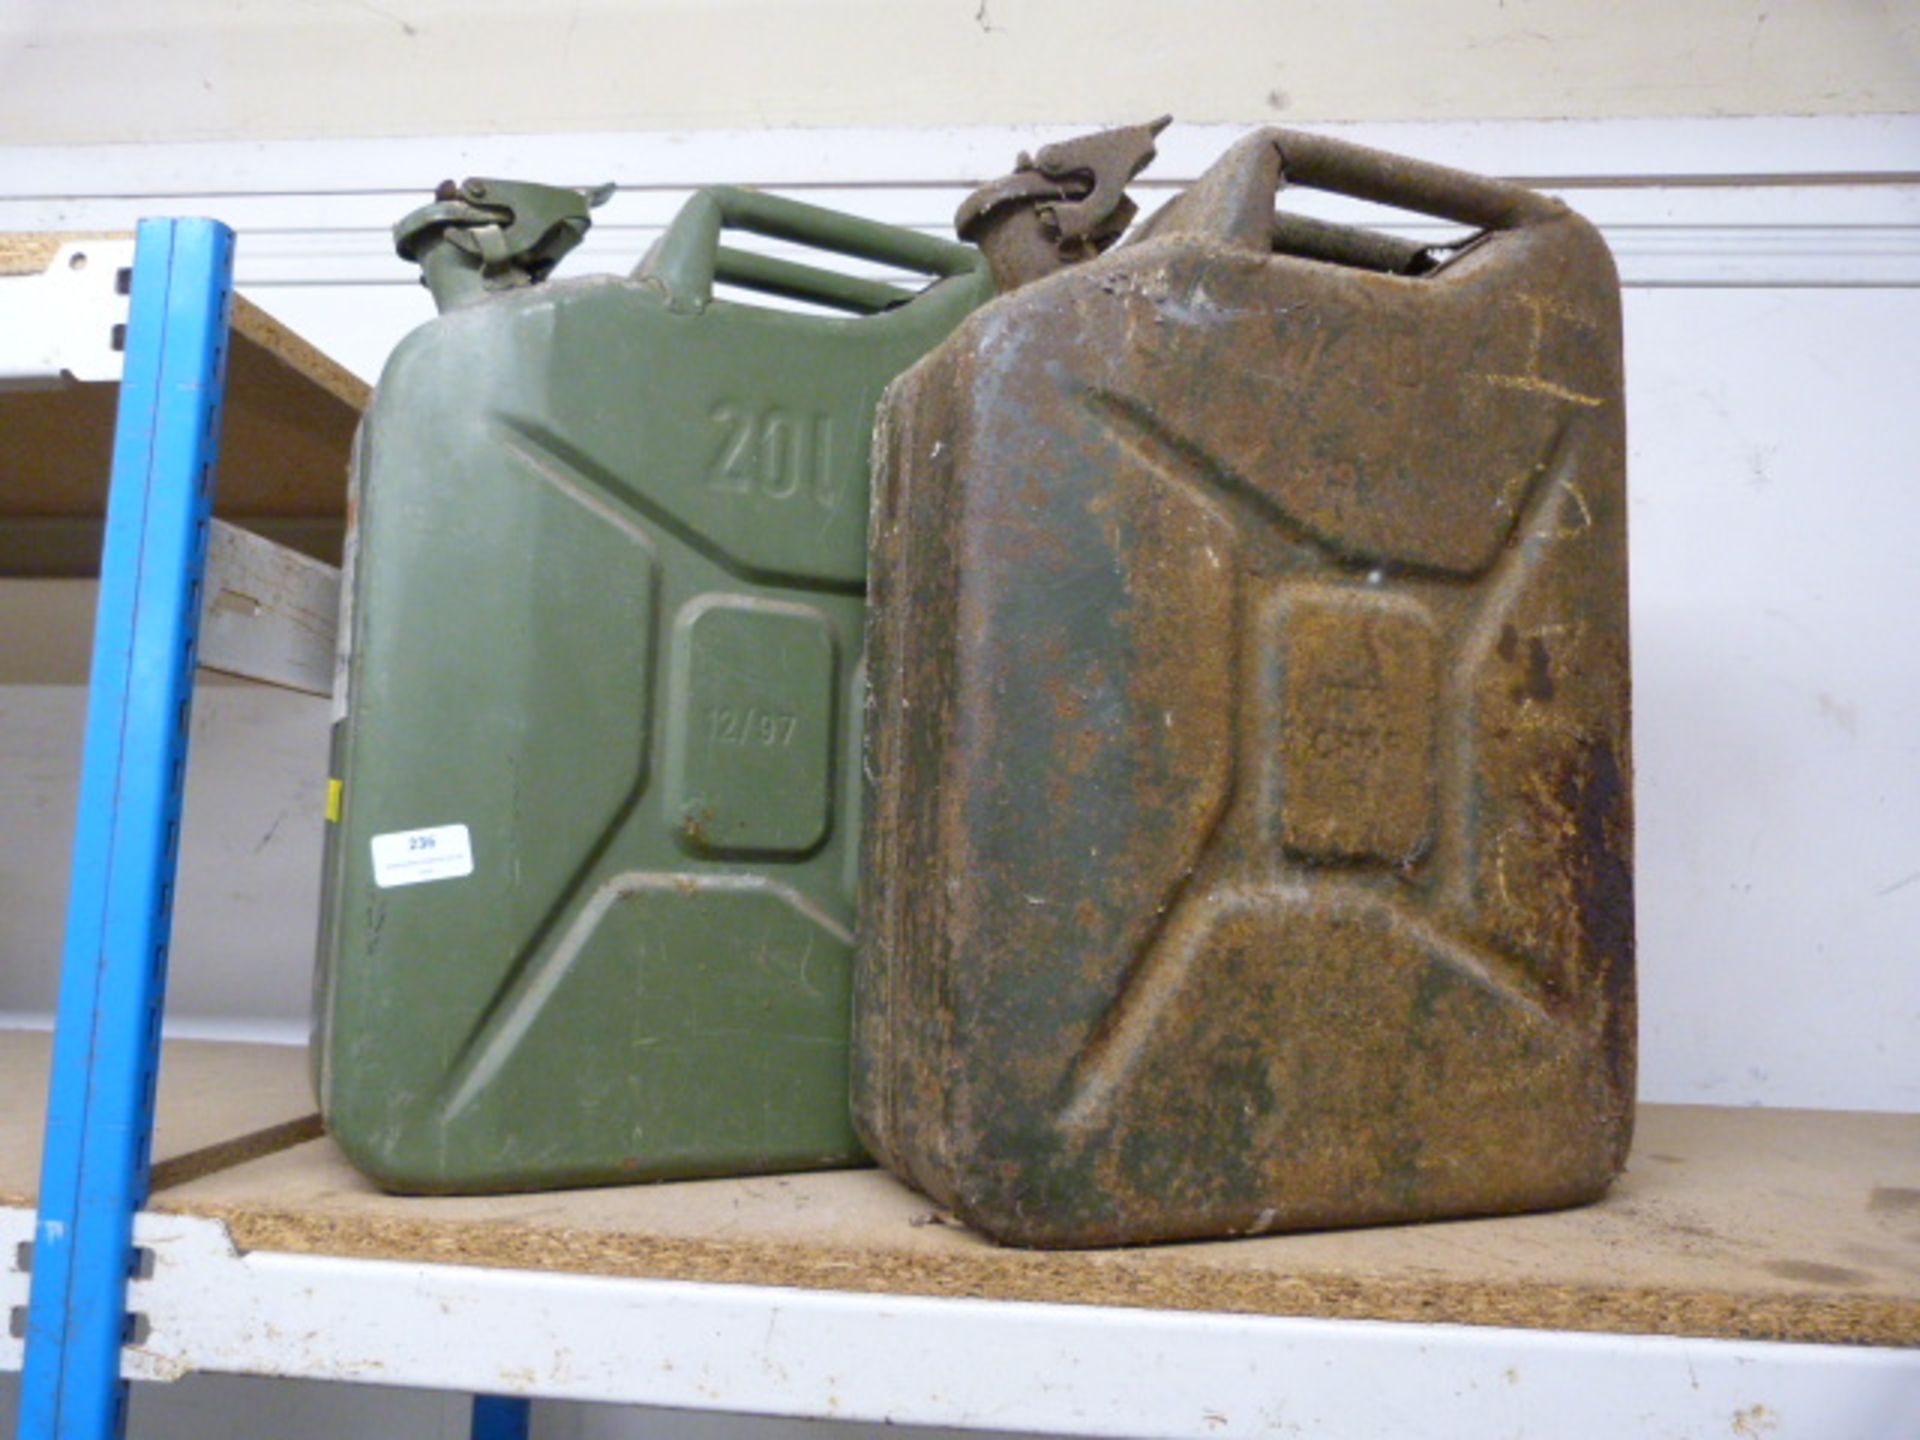 Two Jerry Cans